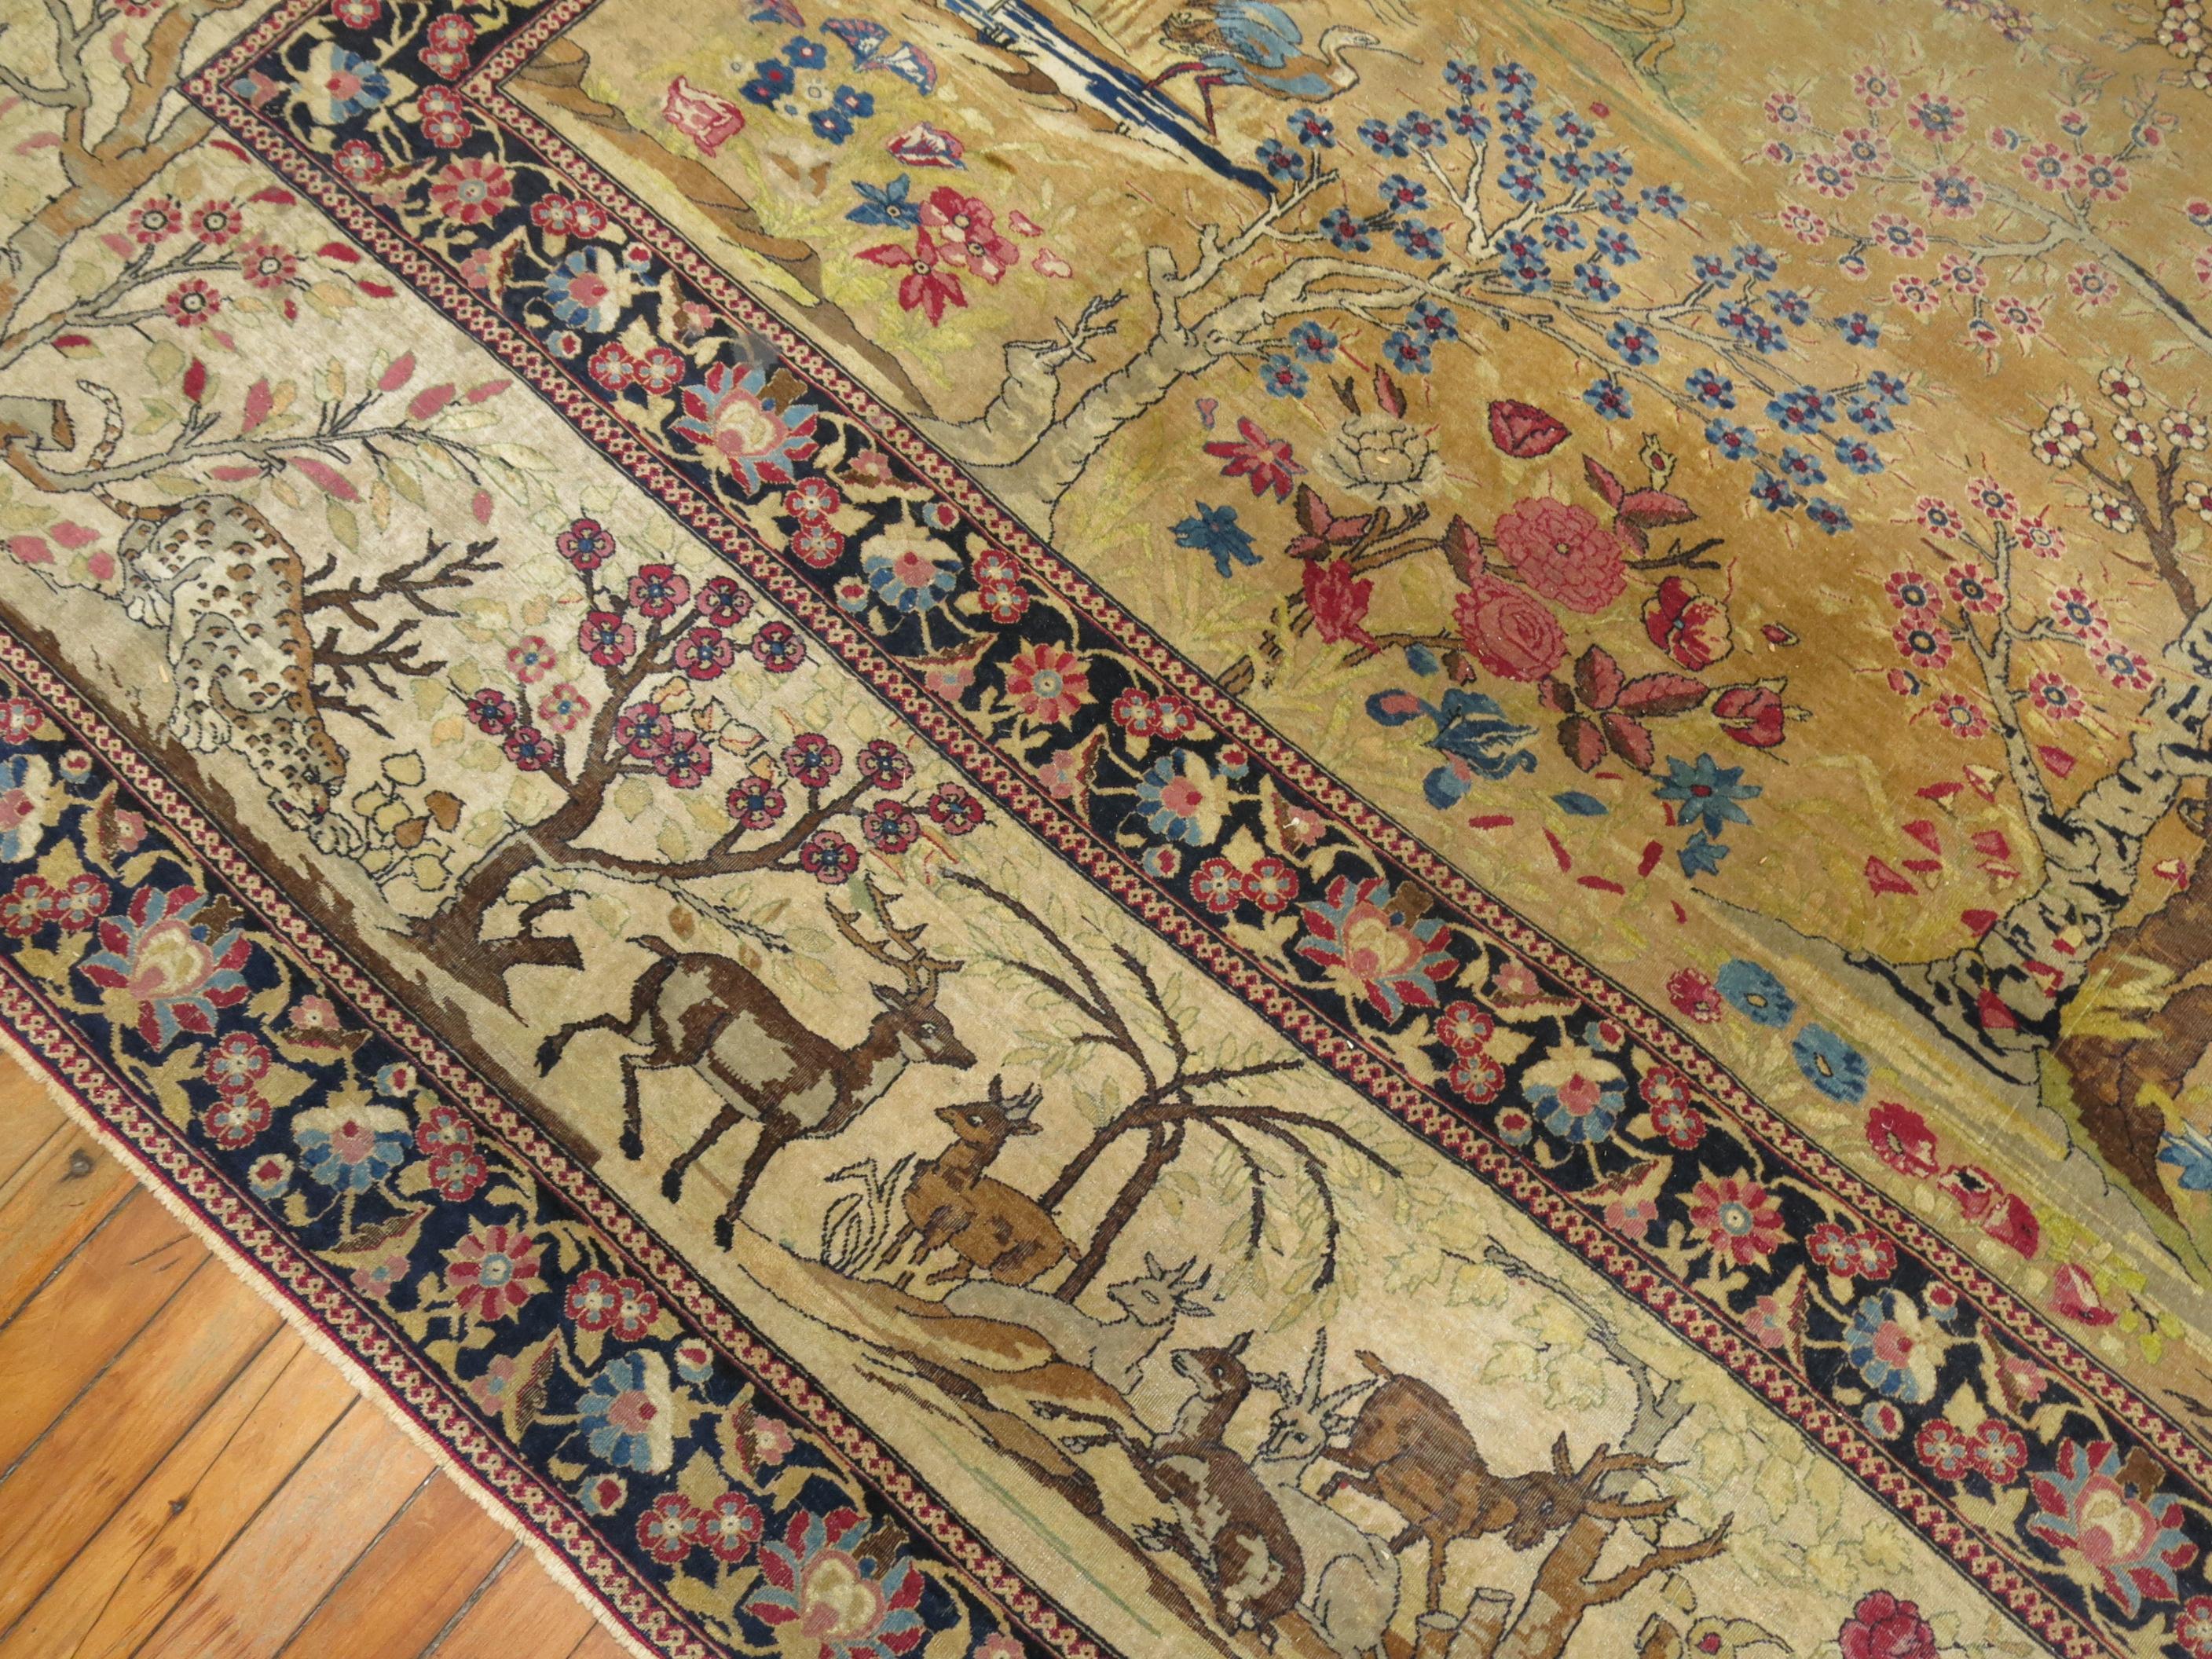 Persian Pictorial Animal Landscape Rug 11